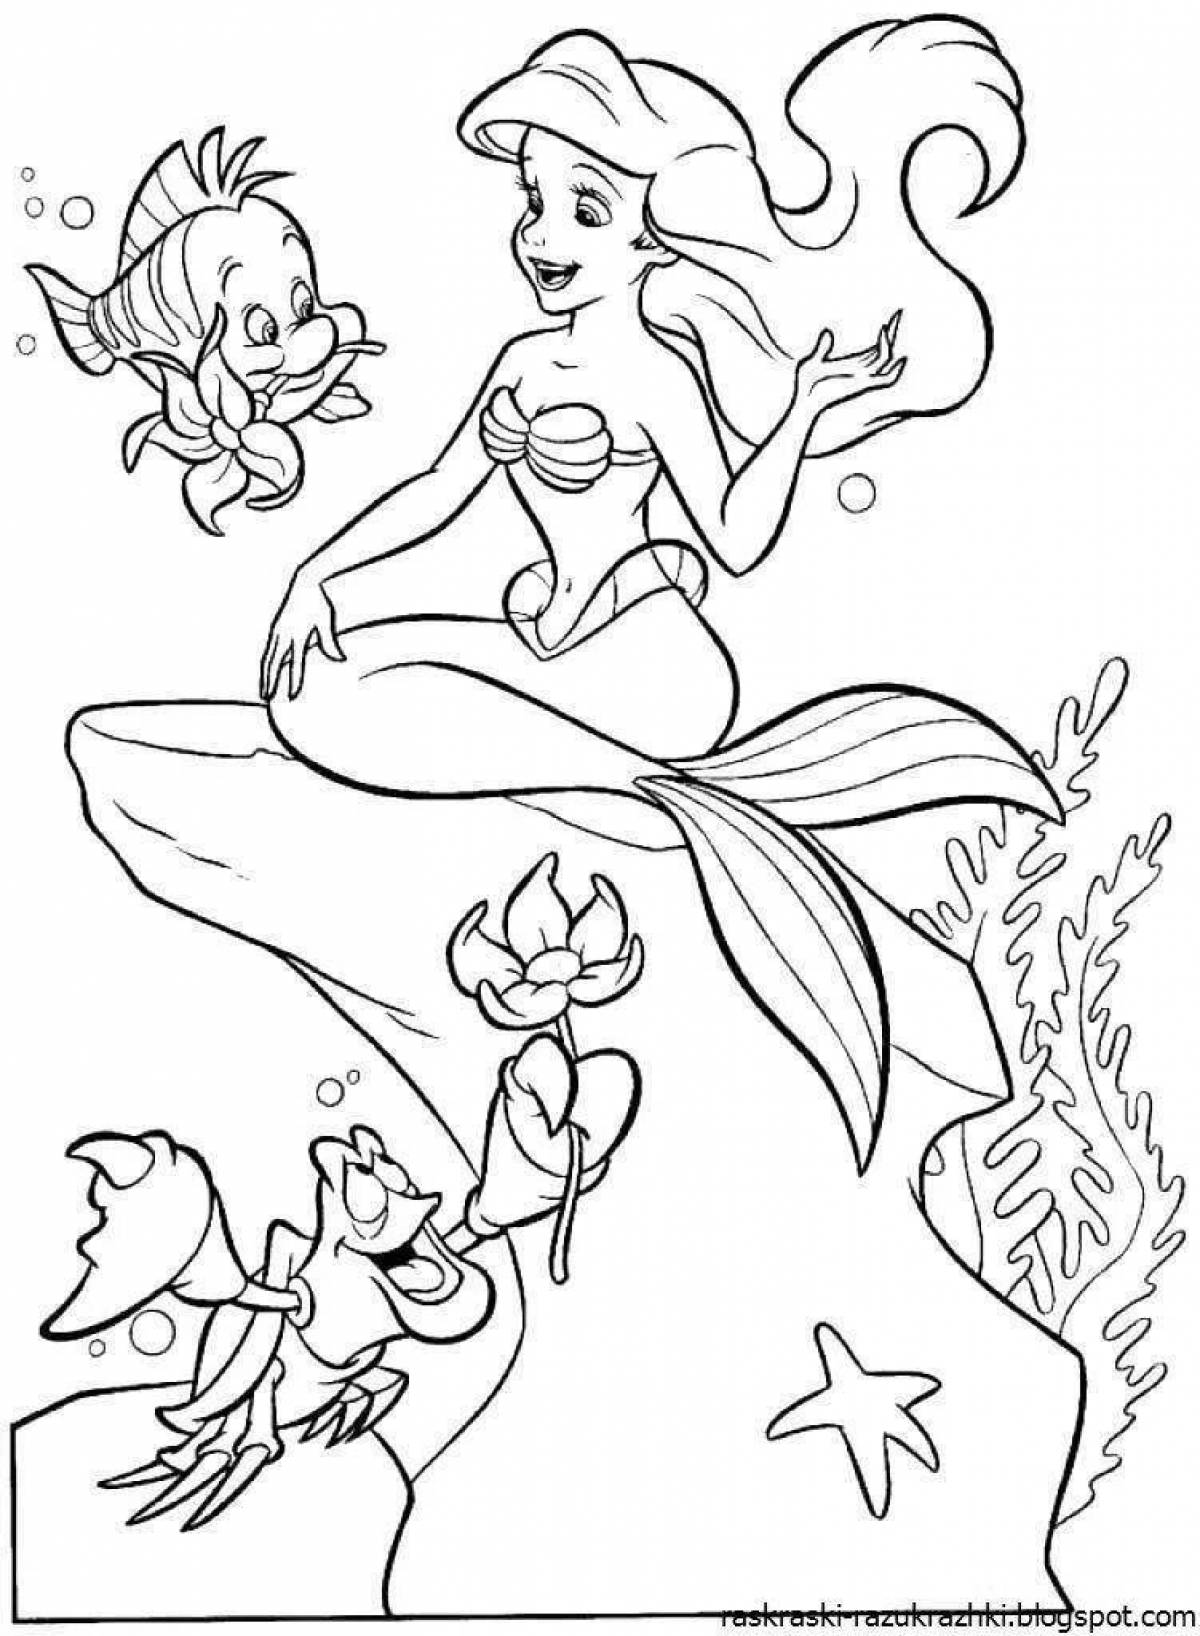 Adorable little mermaid coloring book for 4-5 year olds